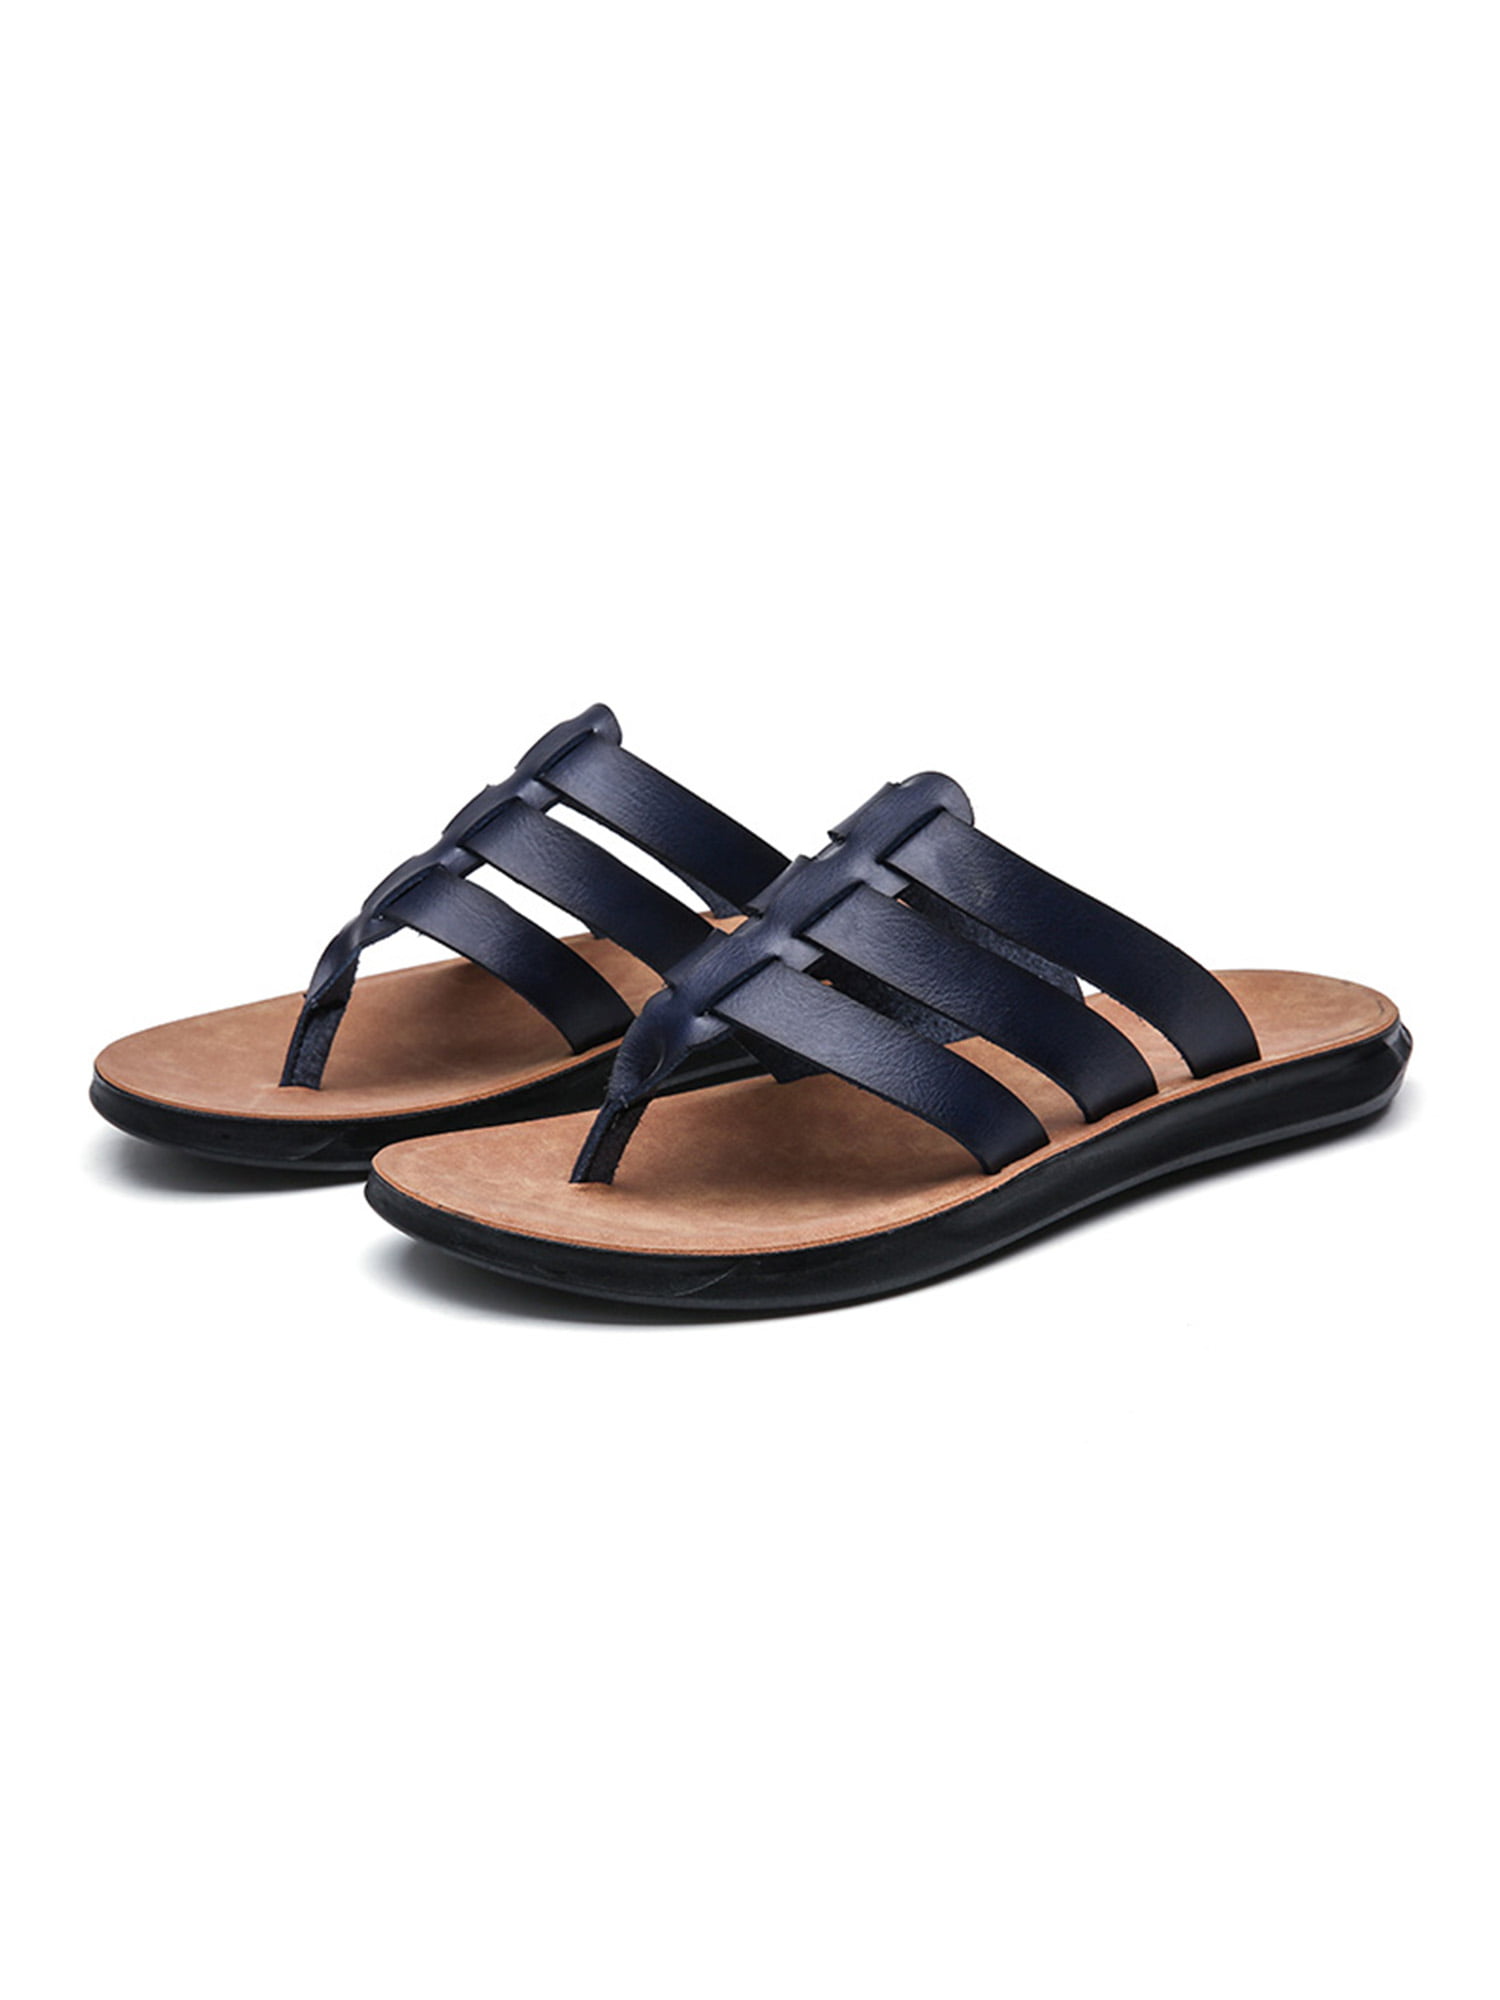 Mens Leather Sandals Summer Beach Walking Comfort Flip Flop Mules New Shoes Size